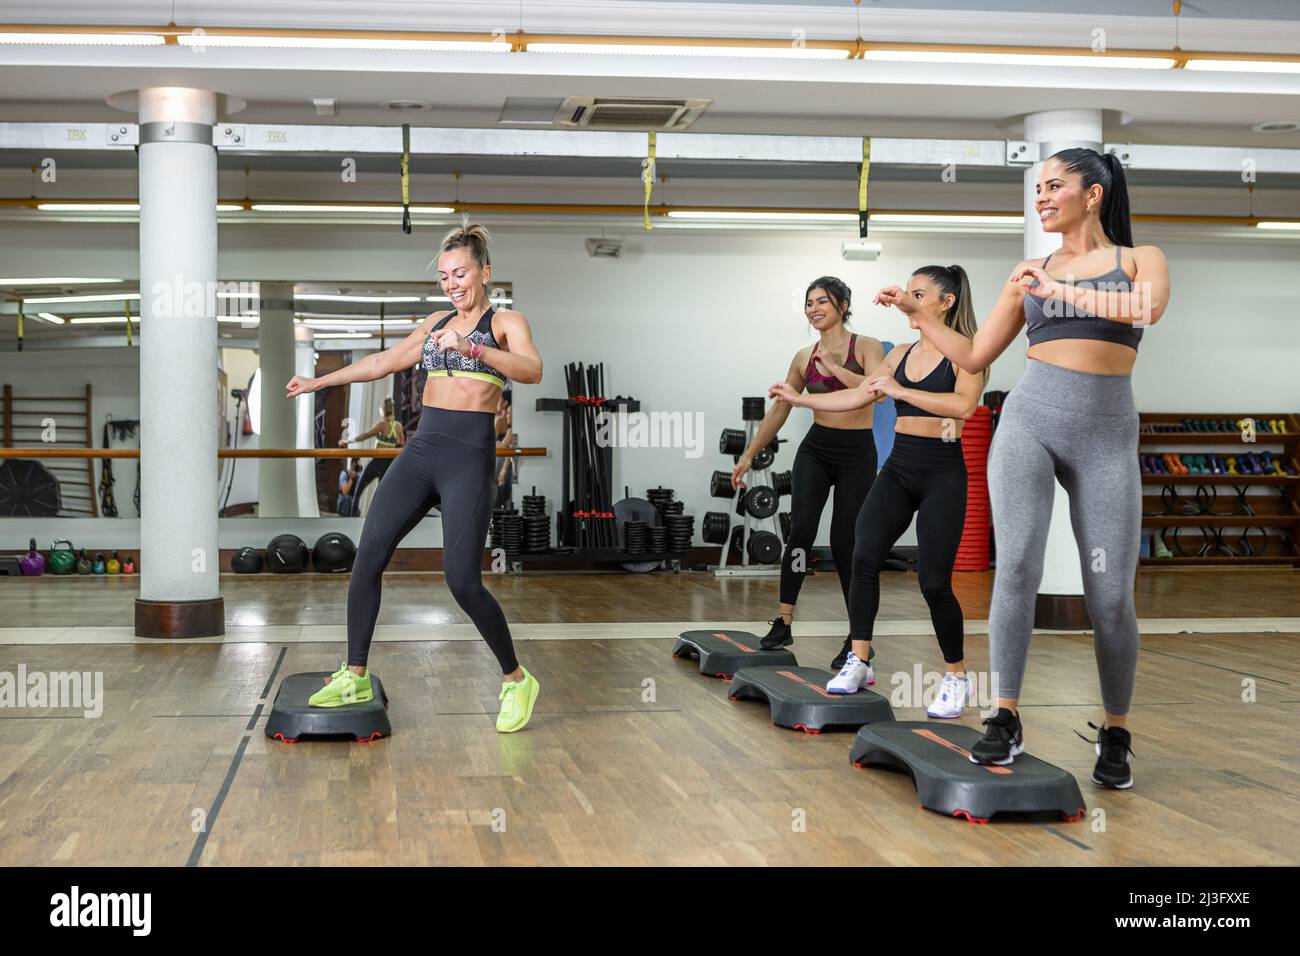 Group of gleeful female athletes and instructor smiling and dancing energetically on steppers during aerobic training in spacious modern gym Stock Photo